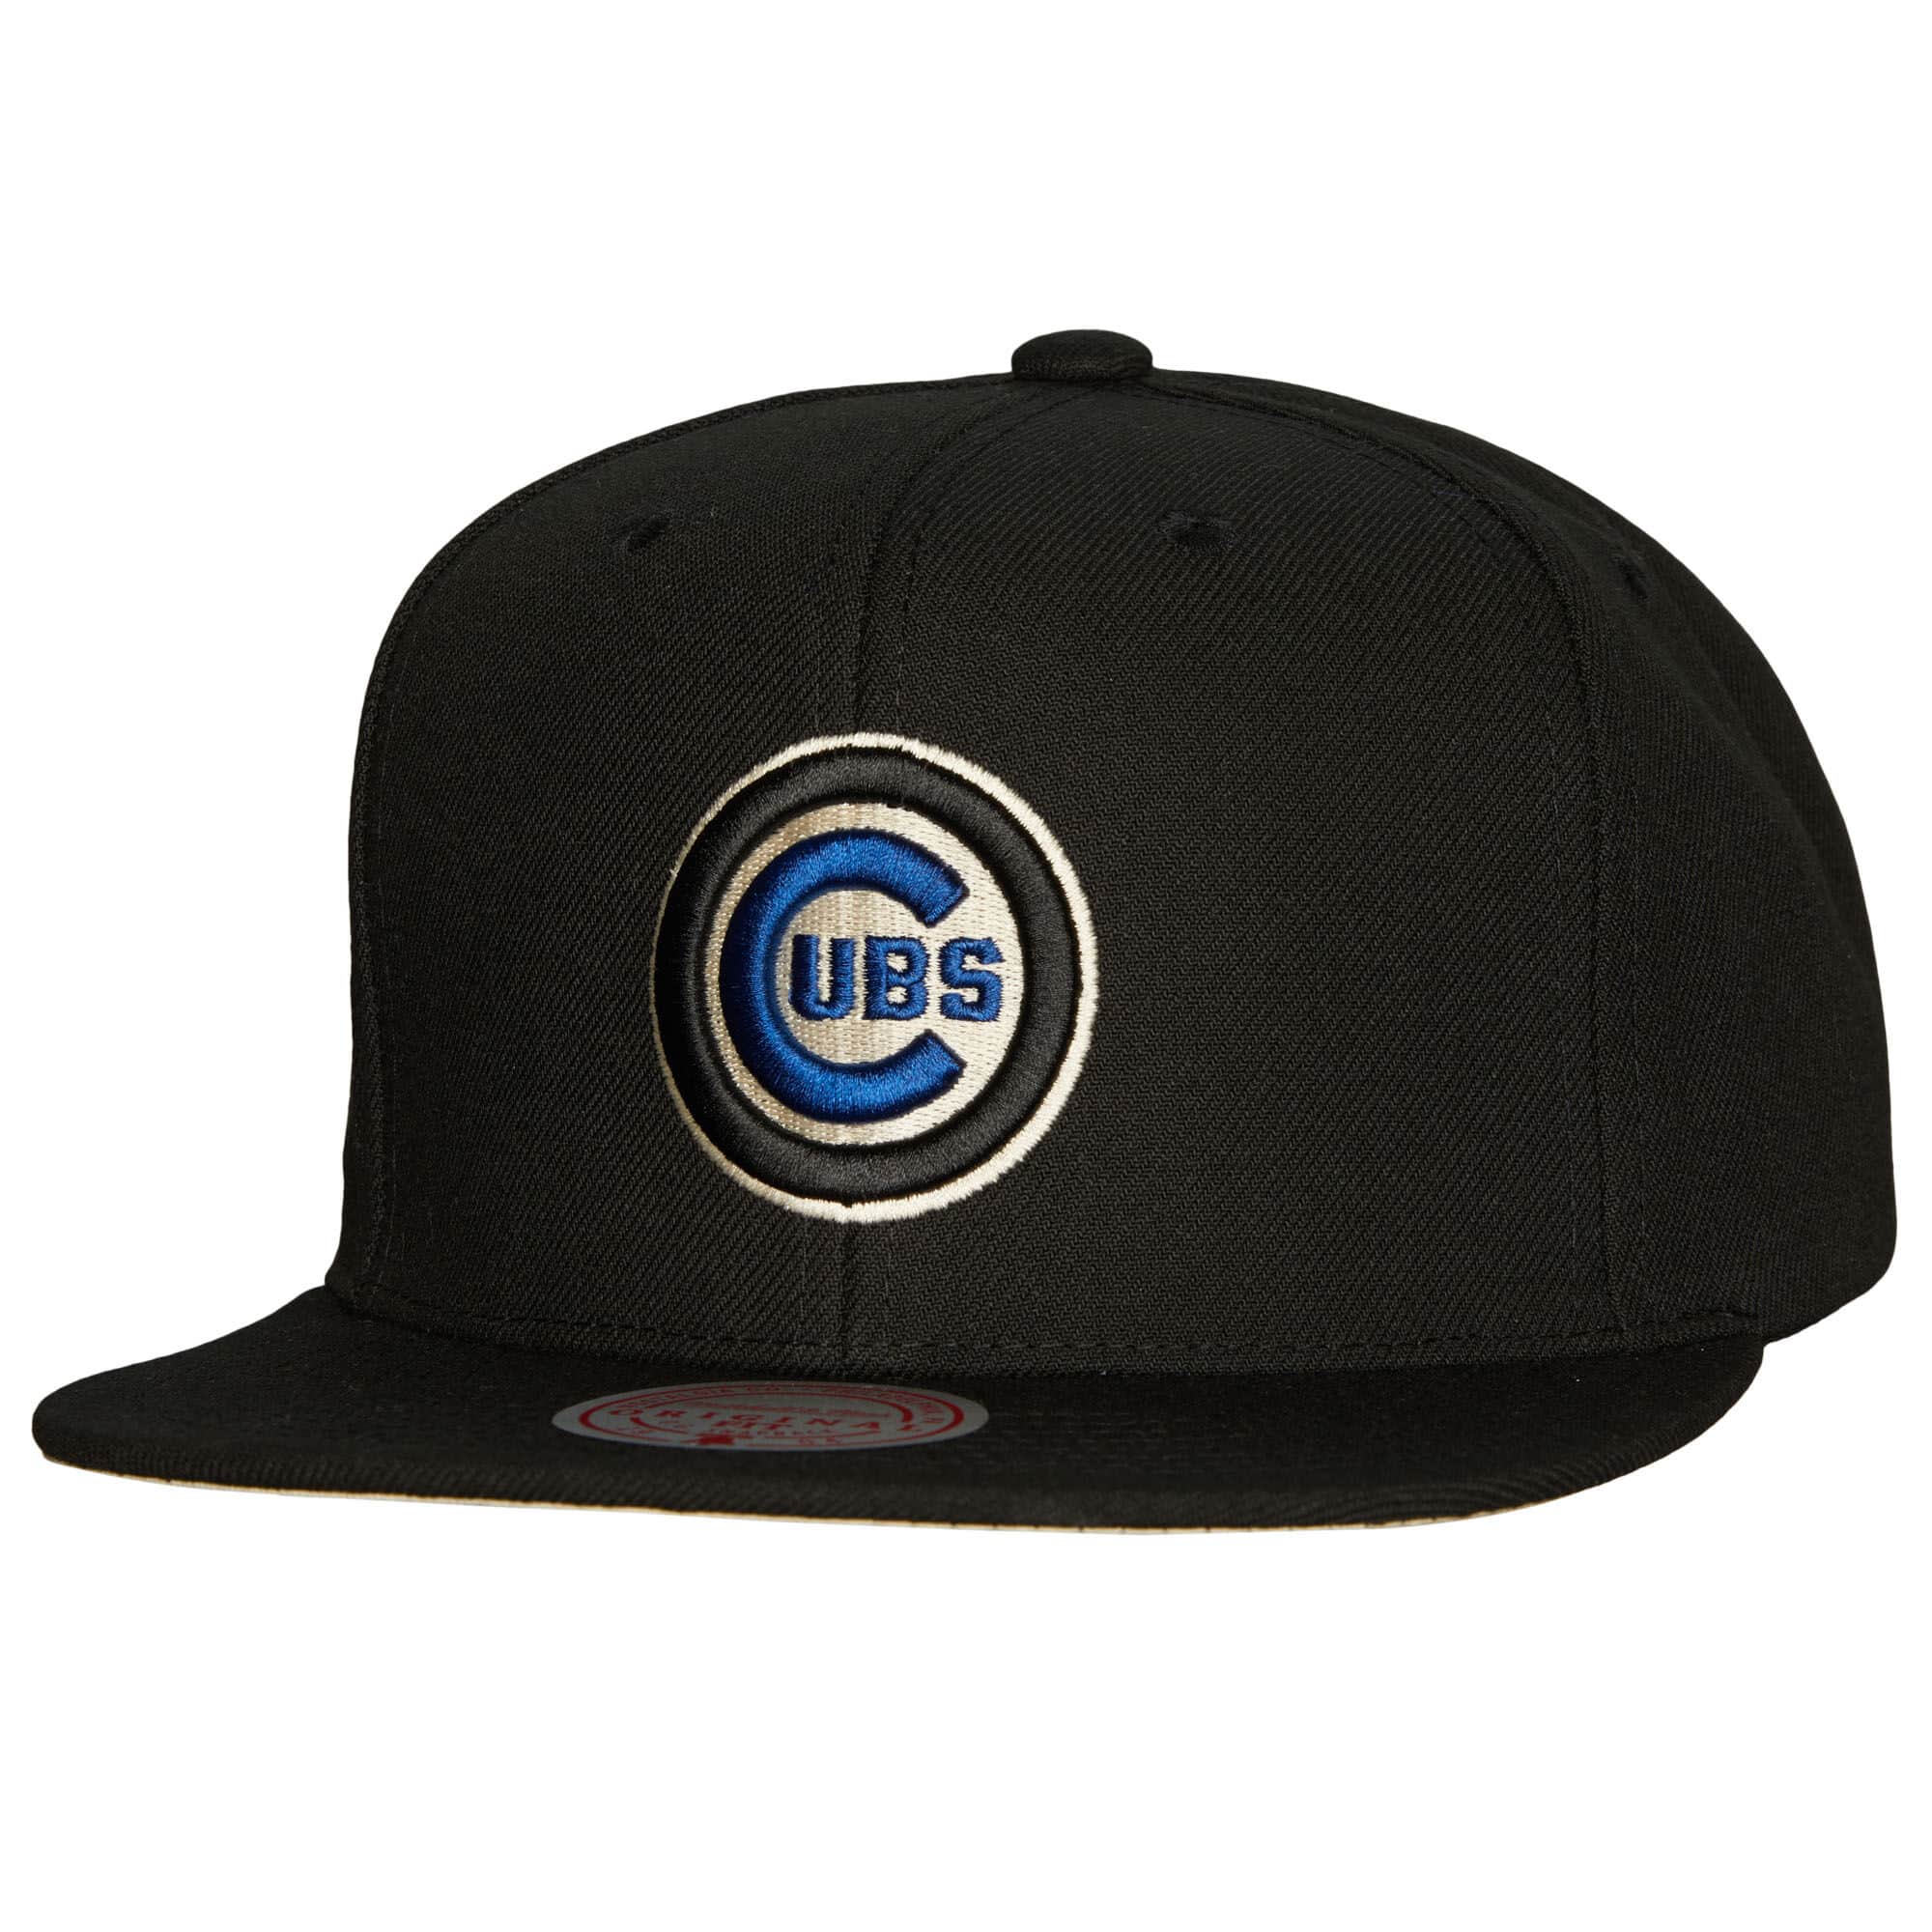 MITCHELL&NESS CUBS TM CLASSIC SNAP